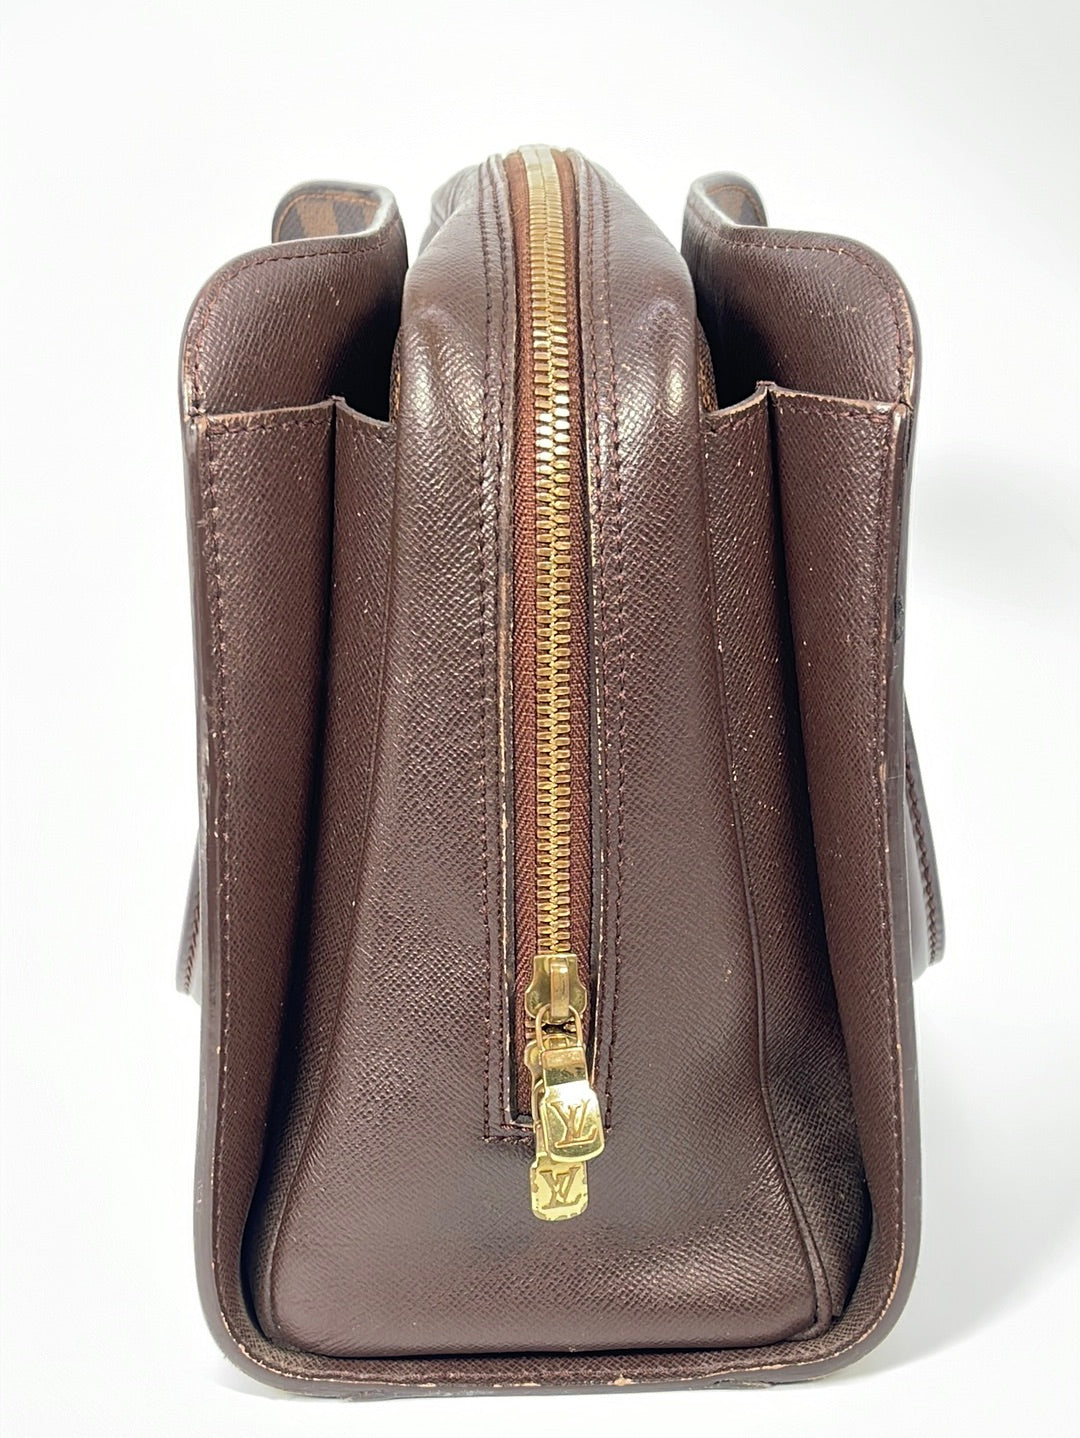 Triana leather handbag Louis Vuitton Brown in Leather - 26902079